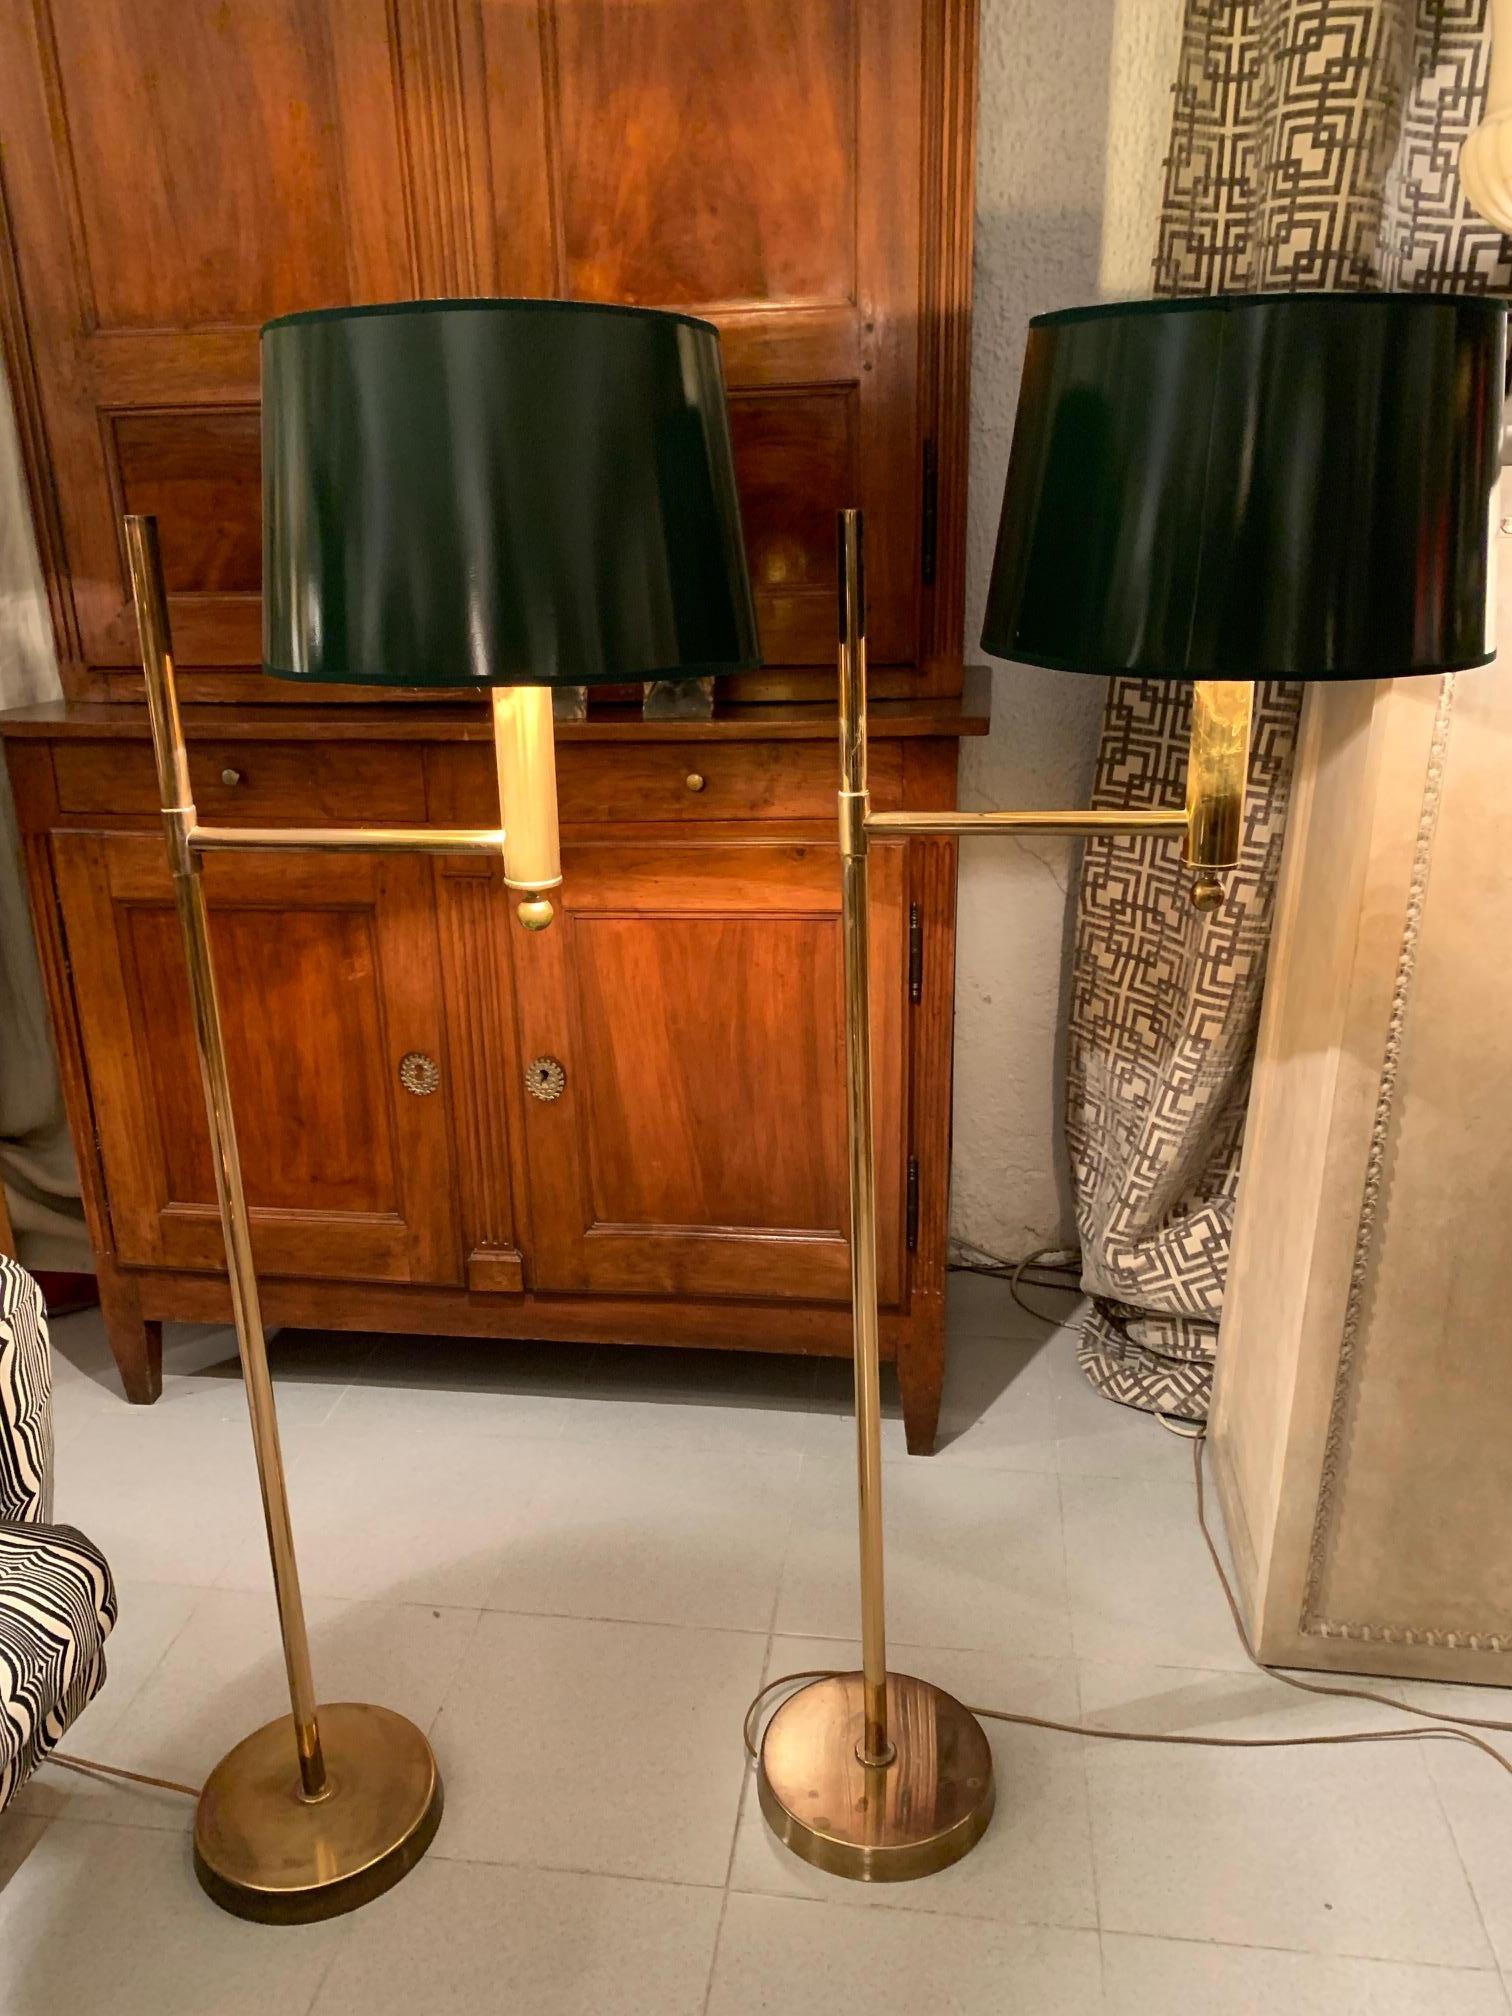 A pair of swedish floor lamps in brass, by Bergboms, the lamps have an arm that supports a small column ending in a ball, which supports the lampshade
in this case the lampshade is in green patent leather and its gold interior.
The measurements of